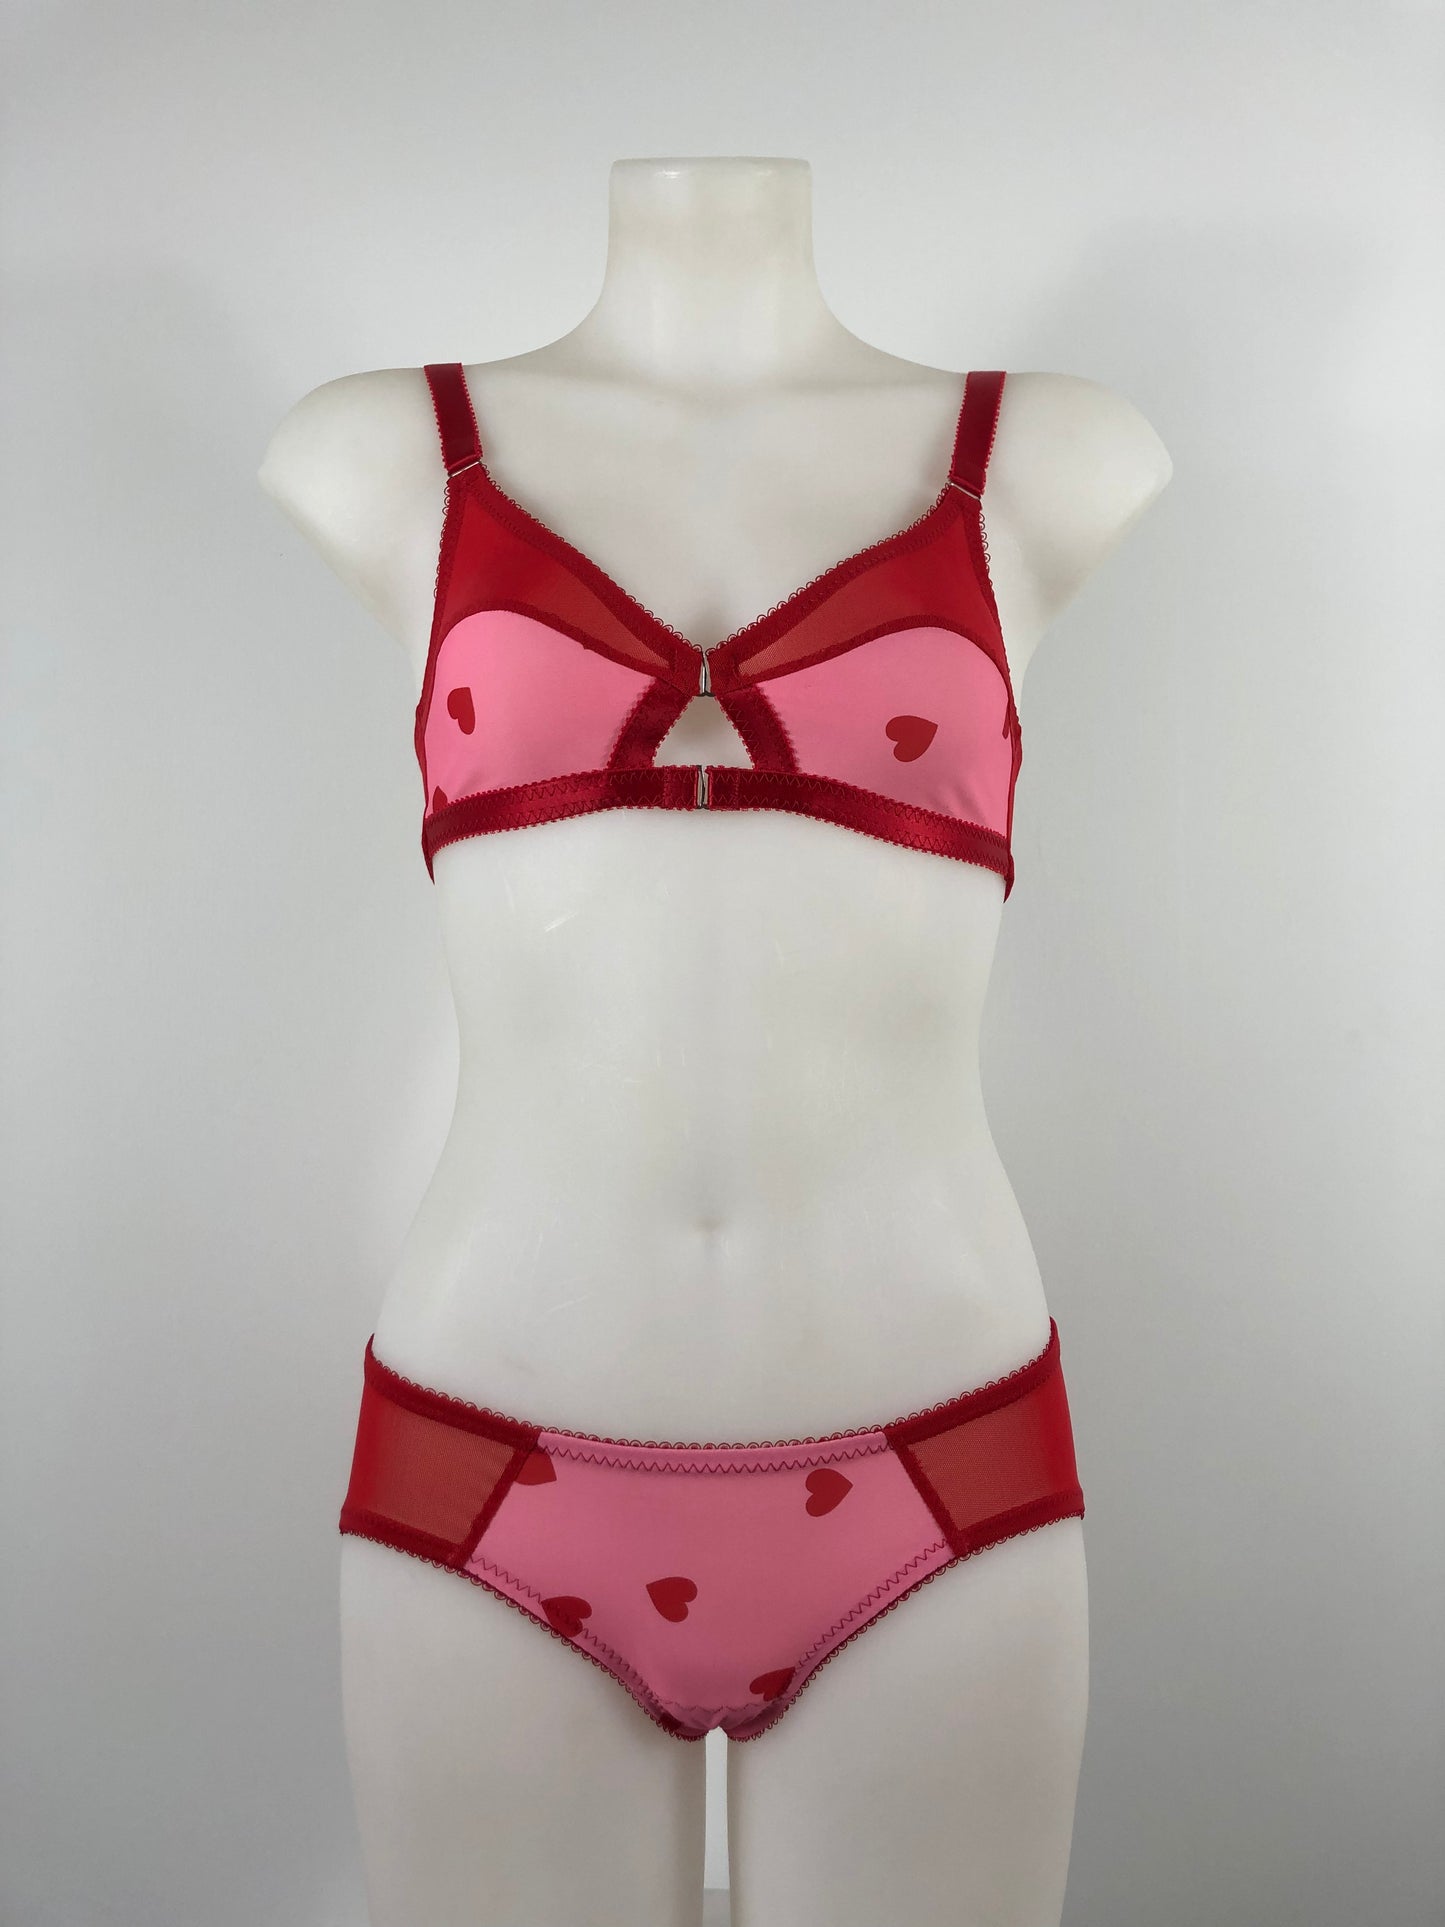 red and pink heart lingerie. vintage inspired soft bralette with pink heart front and red mesh sides, perfect for valentines cheesecake pin ups, front fastening soft vintage style bullet bra A fun, bold, playful retro inspired underwear set